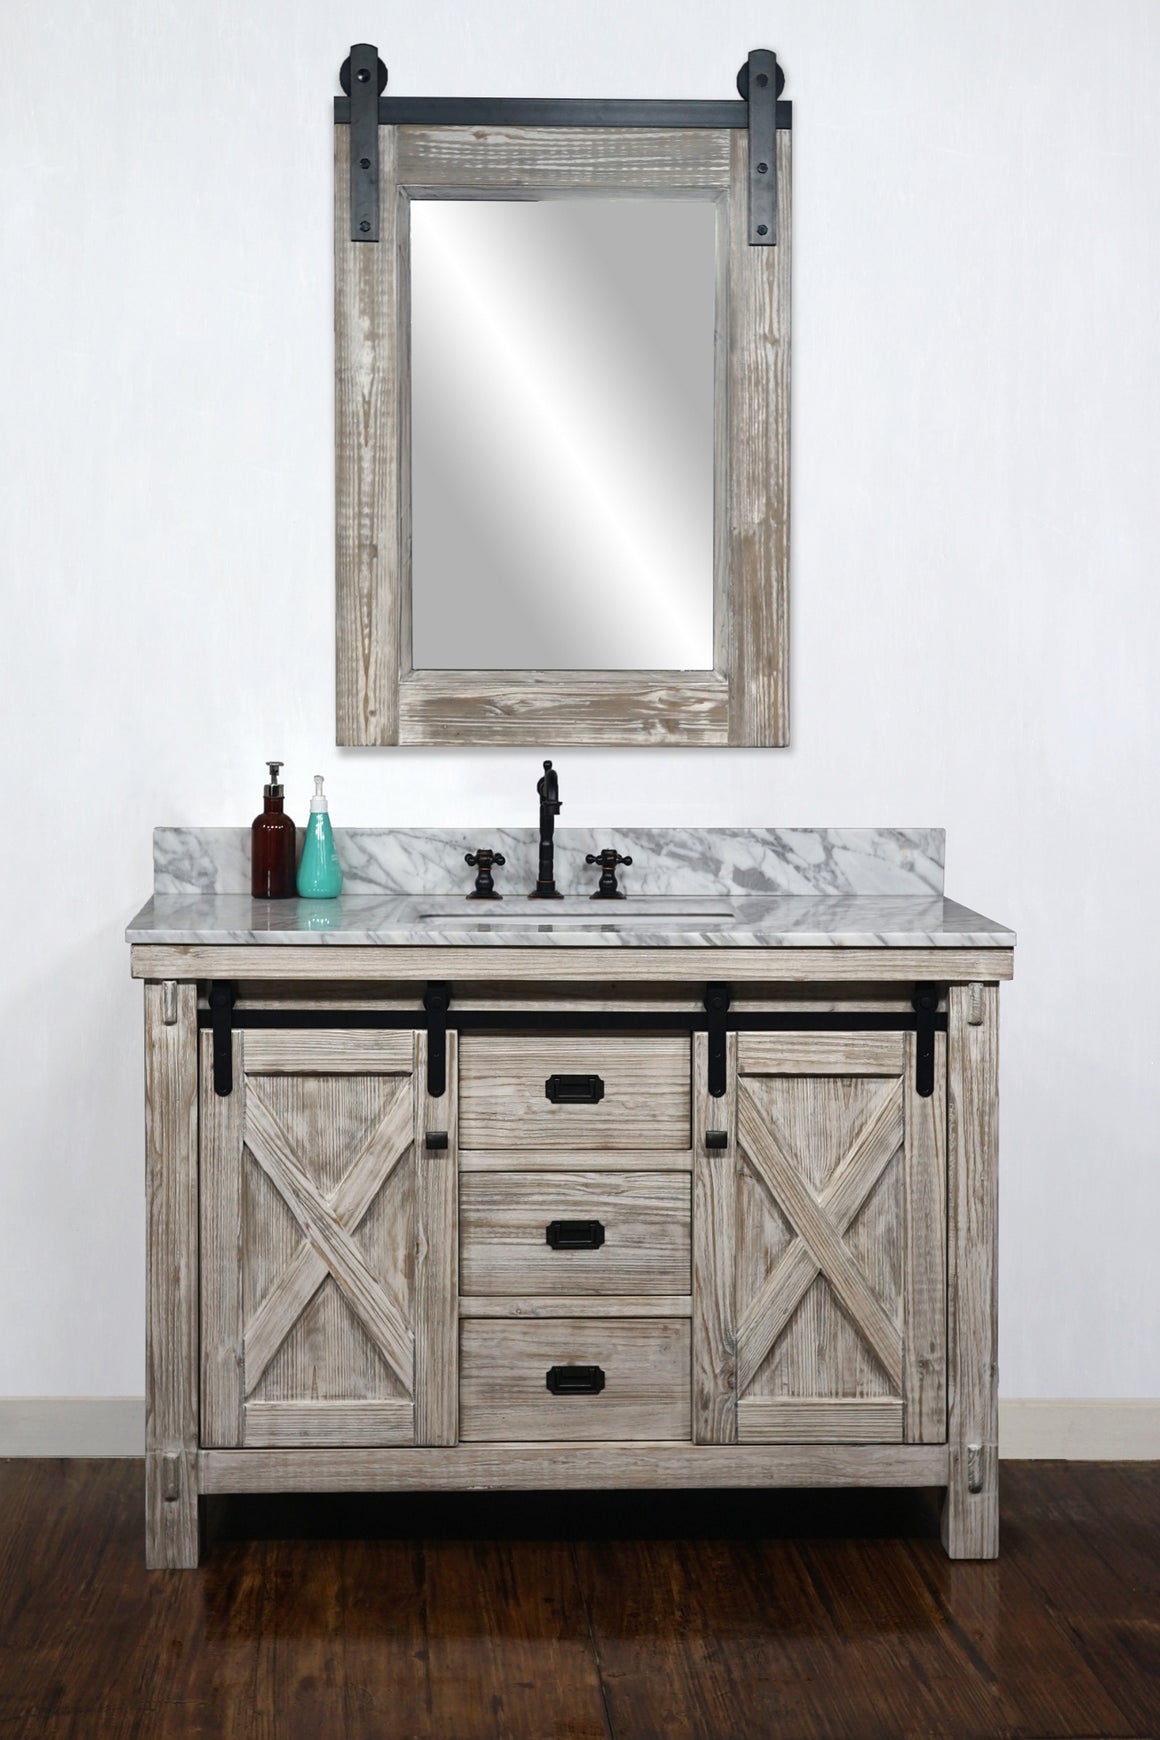 48"RUSTIC SOLID FIR BARN DOOR STYLE SINGLE SINK VANITY IN WHITE WASH WITH CARRARA WHITE MARBLE TOP WITH RECTANGULAR SINK-NO FAUCET